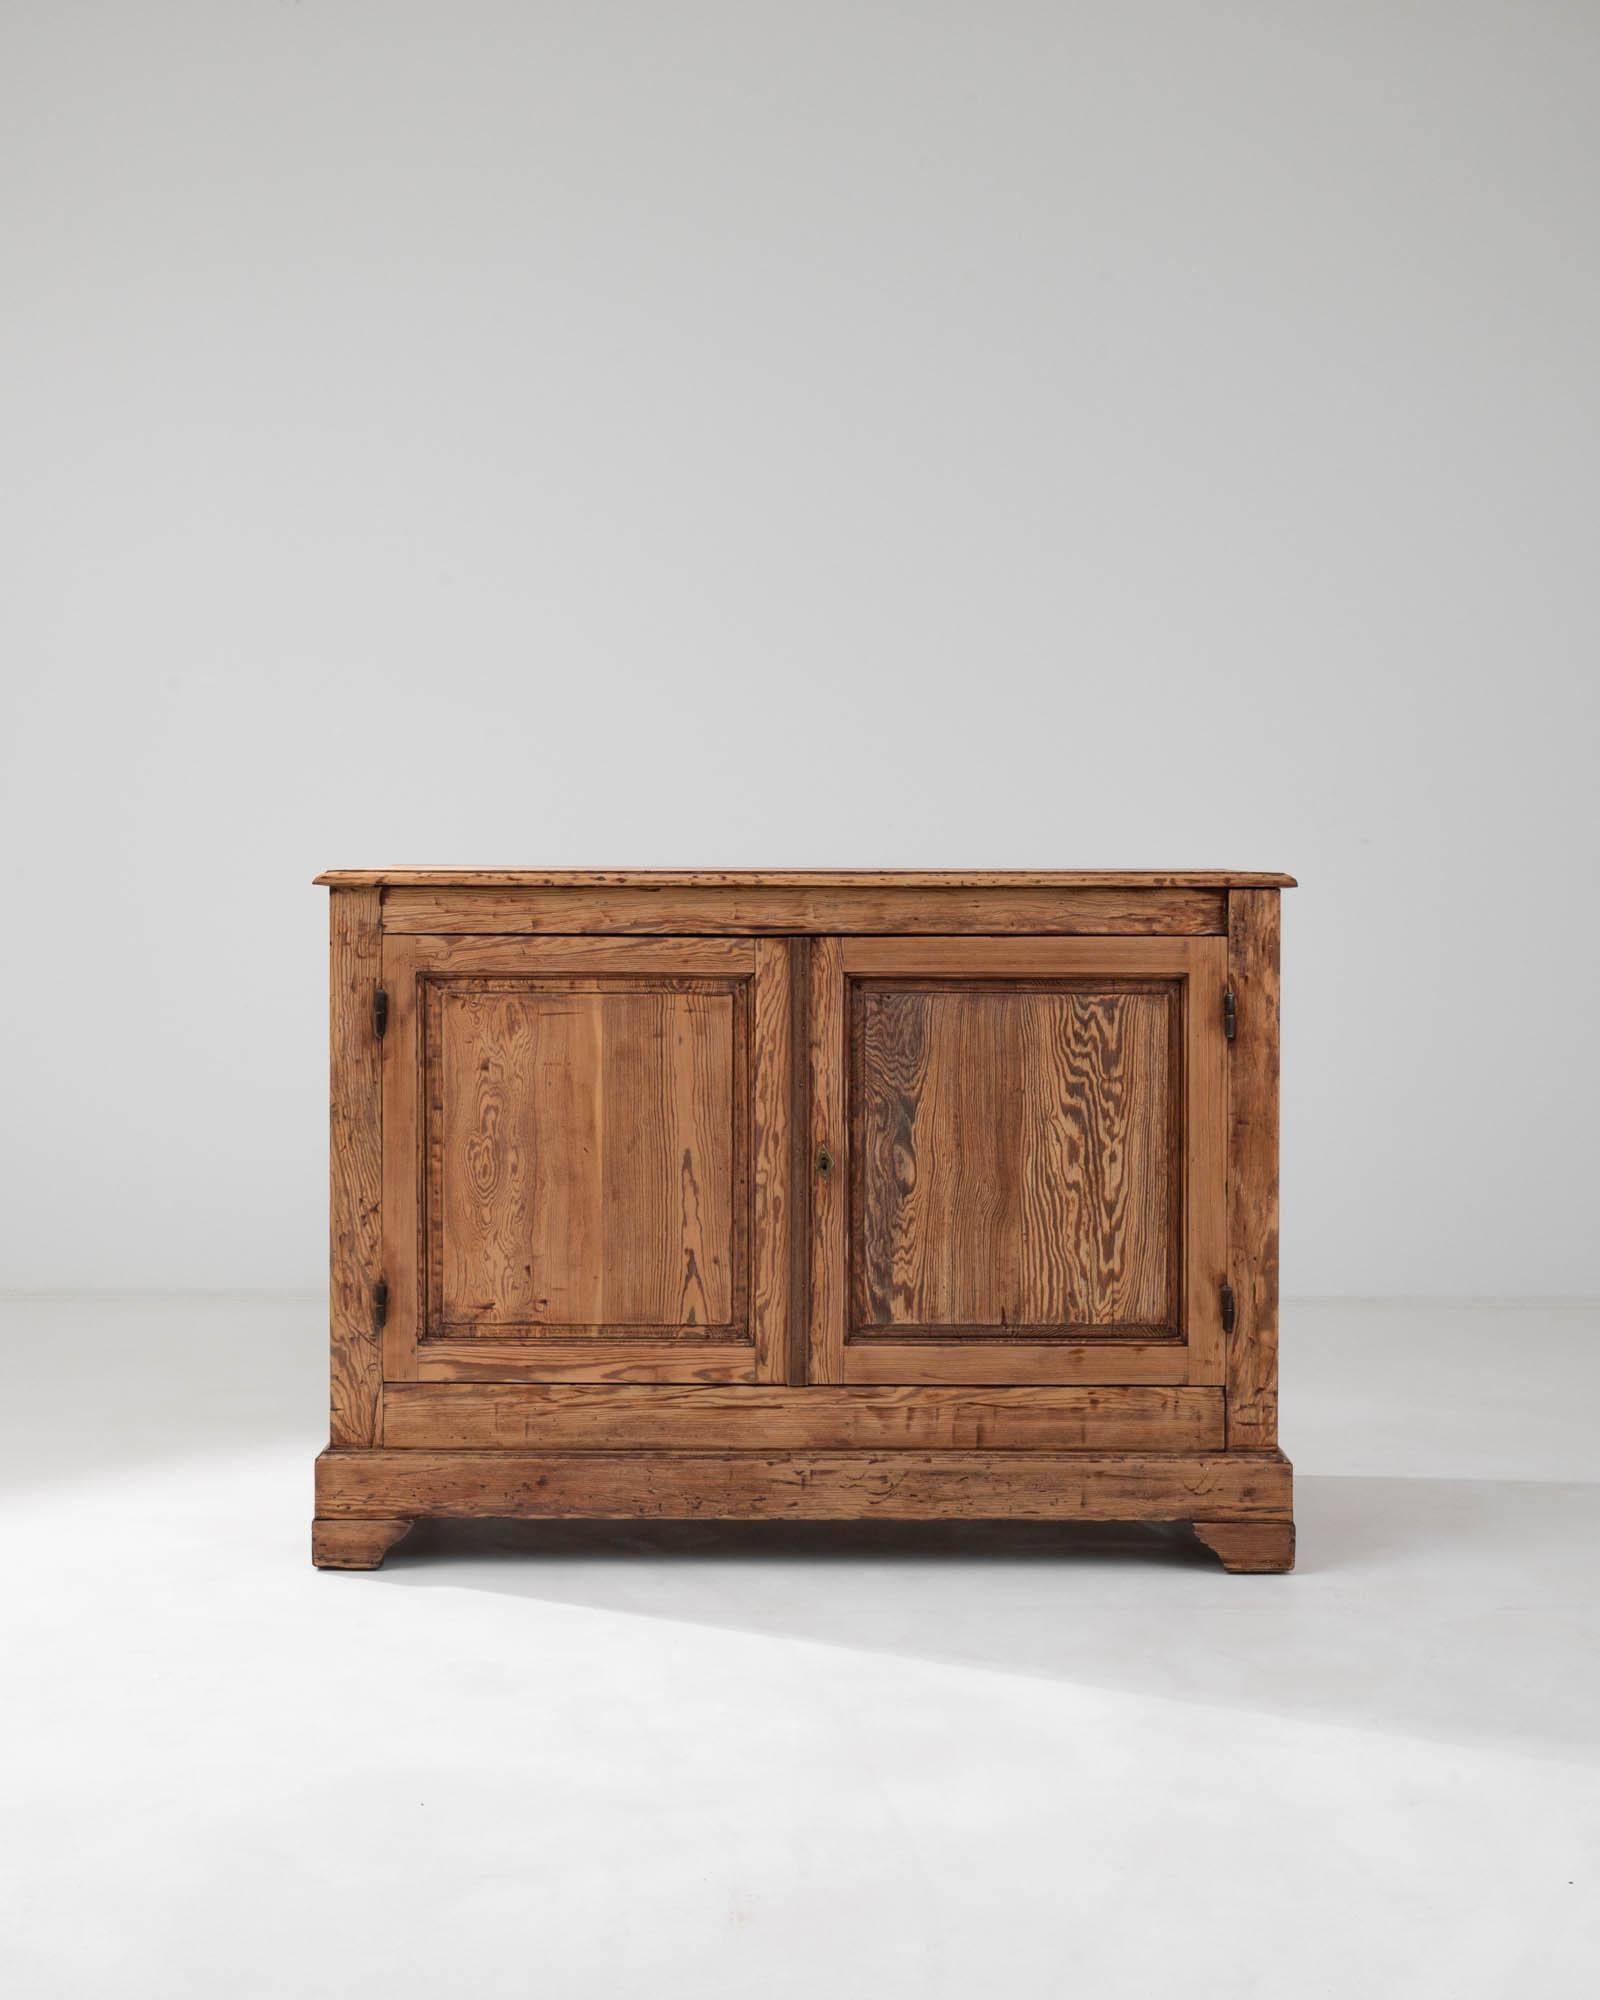 Indulge in the rustic charm of this authentic 19th Century French wooden buffet, a treasure trove of craftsmanship that echoes the storied past of provincial France. Each glance reveals the rich patina and wood grain that has deepened with time, a